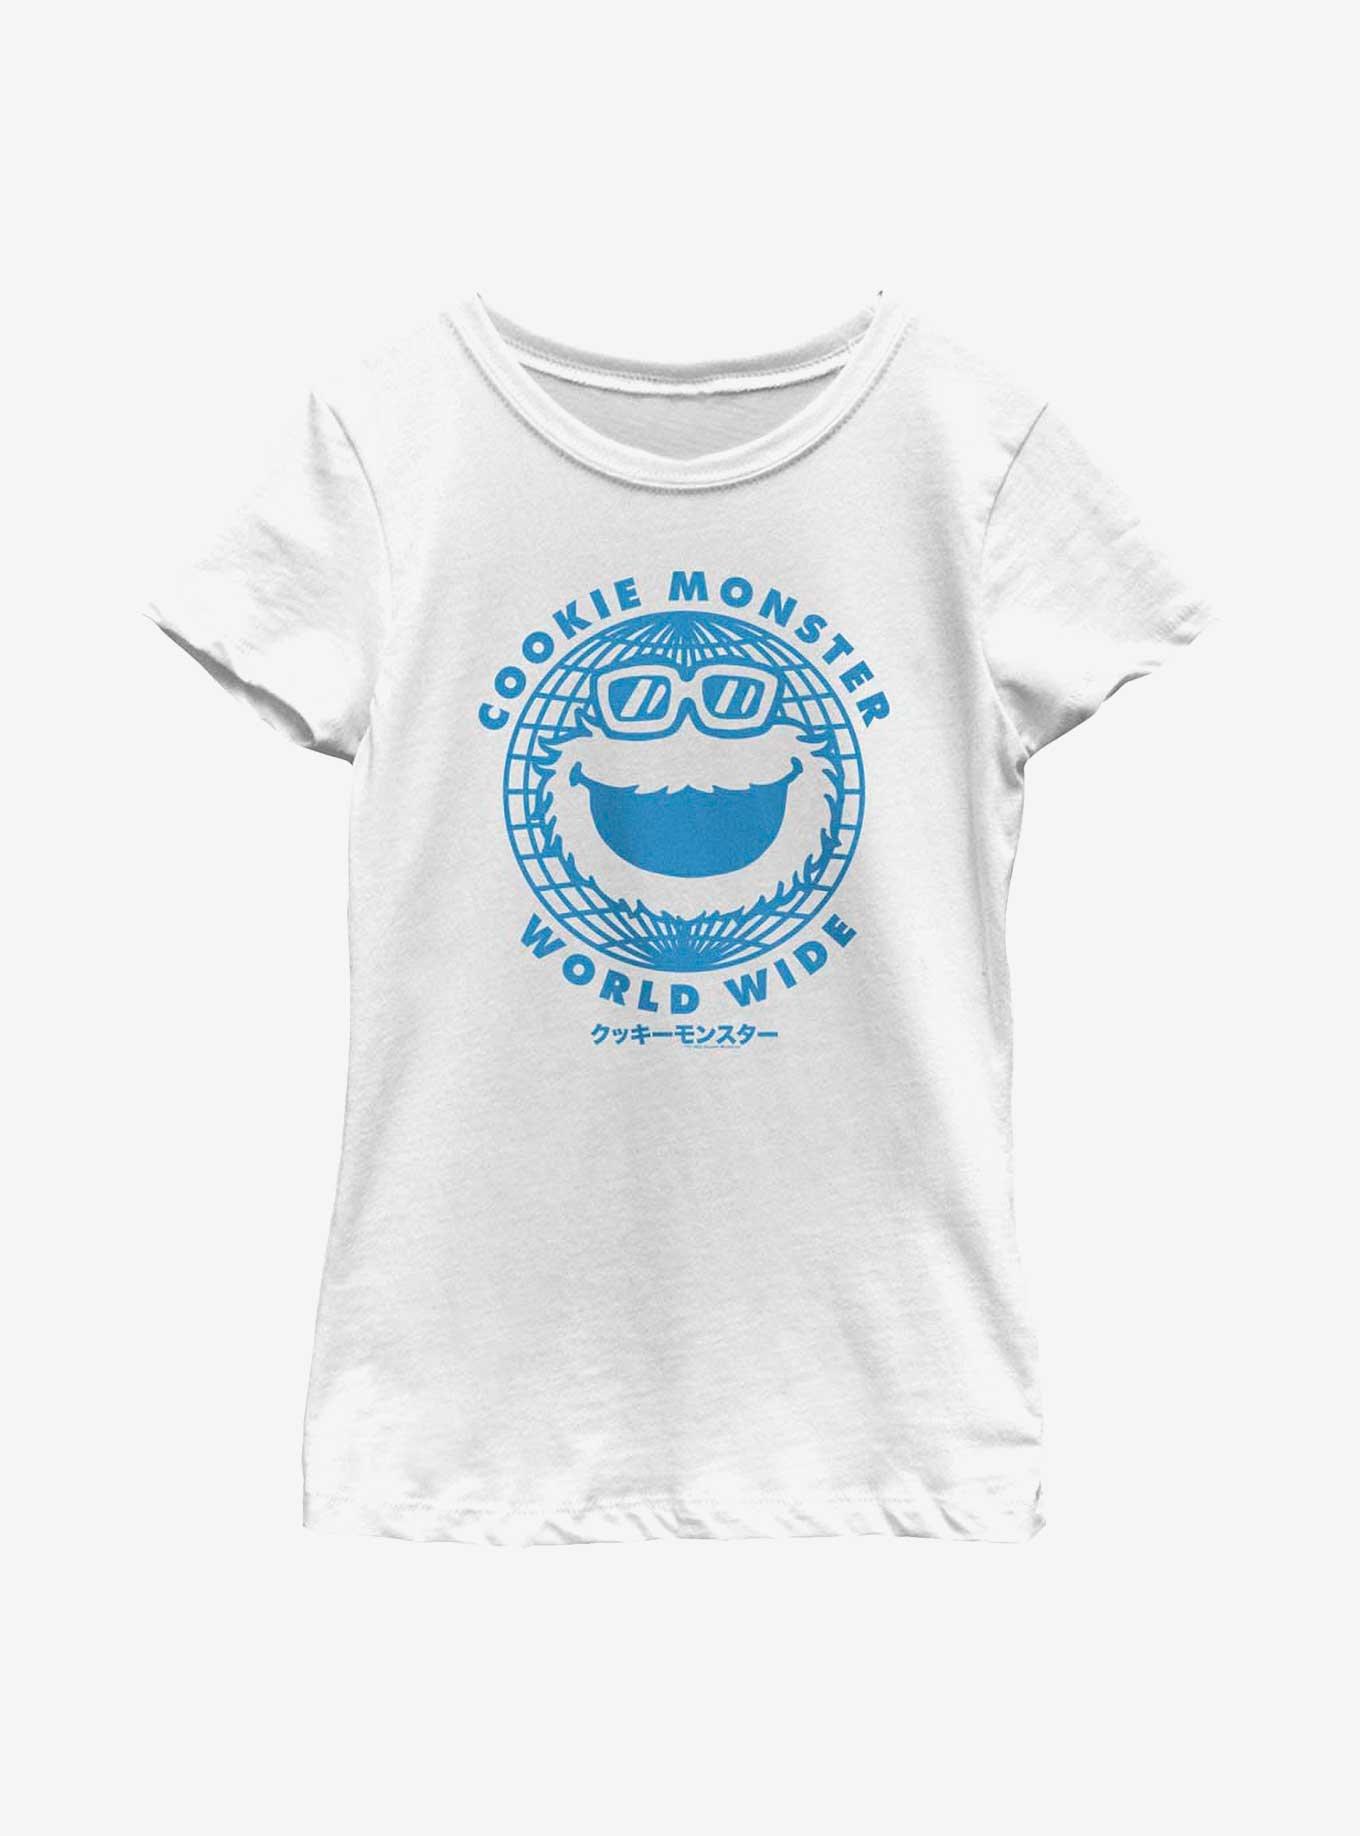 Sesame Street Cookie Monster World Wide Youth Girls T-Shirt, WHITE, hi-res